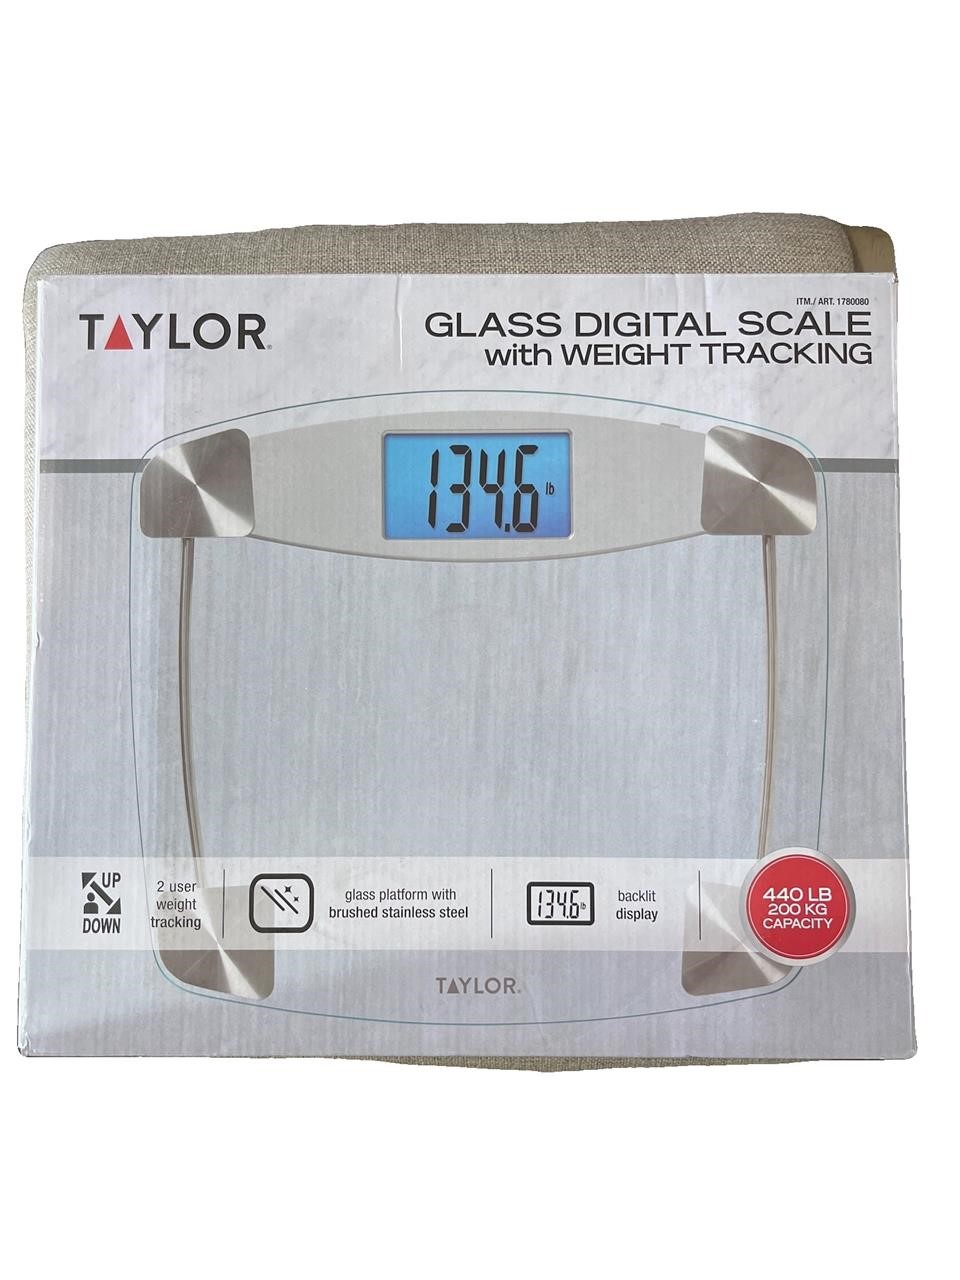 Taylor Glass Digital Scale  440LB  Stainless Steel